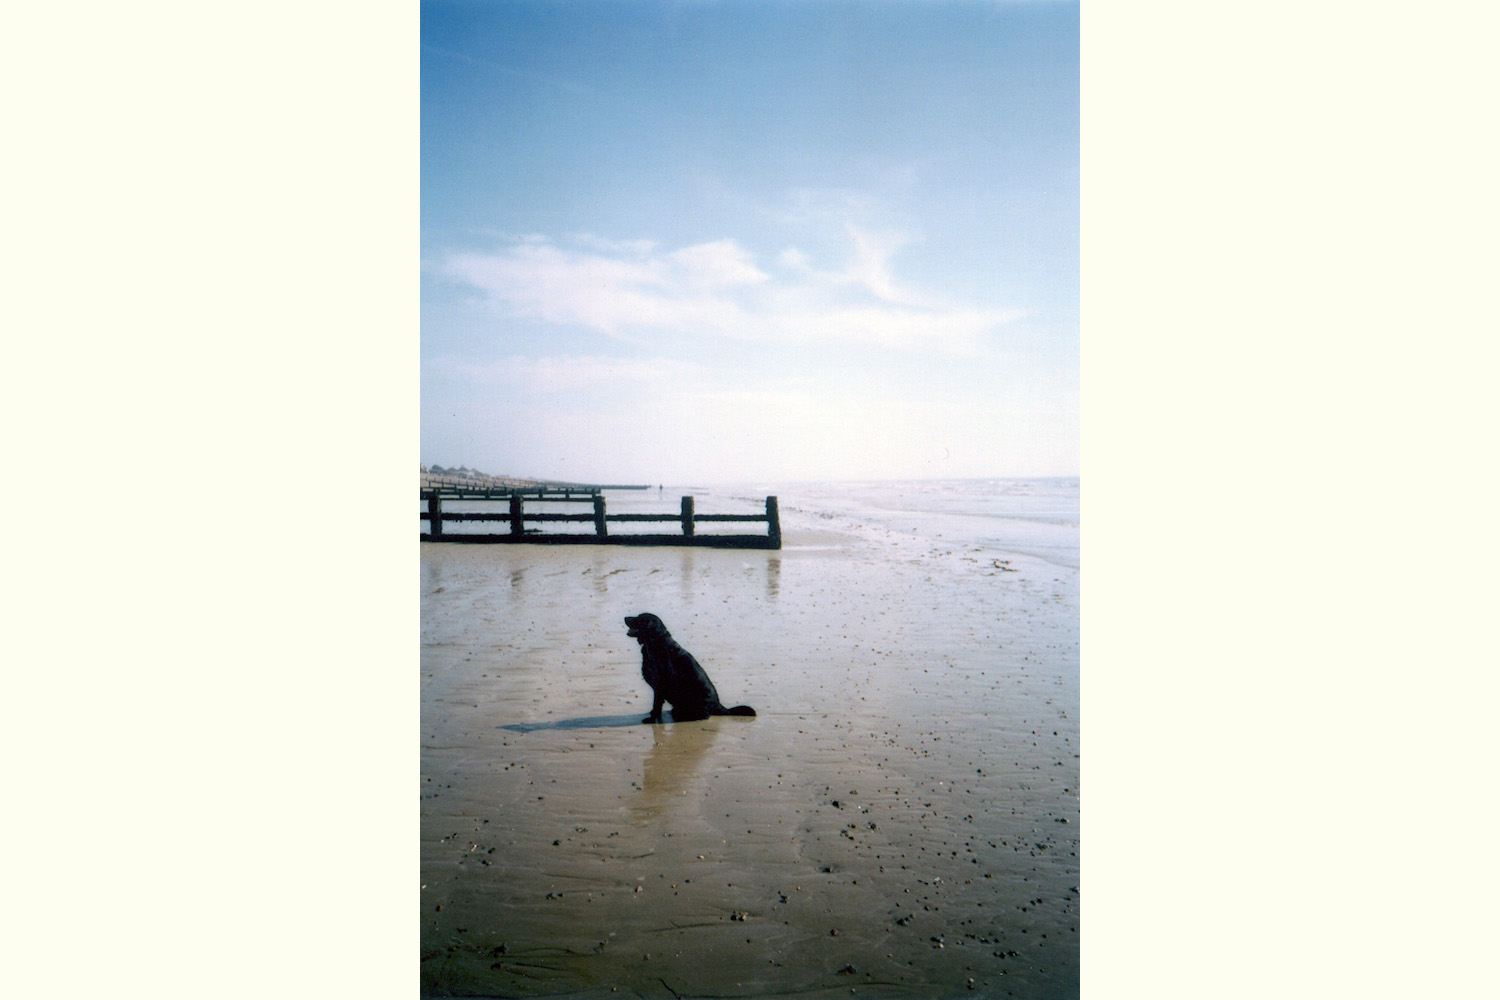  “The beach is a very calm space where I can experience freedom of thought and well being. I enjoy spending time with my dog and I feel in this particular picture a feeling of balance and happiness is communicated. Balance is crucial as it implies co